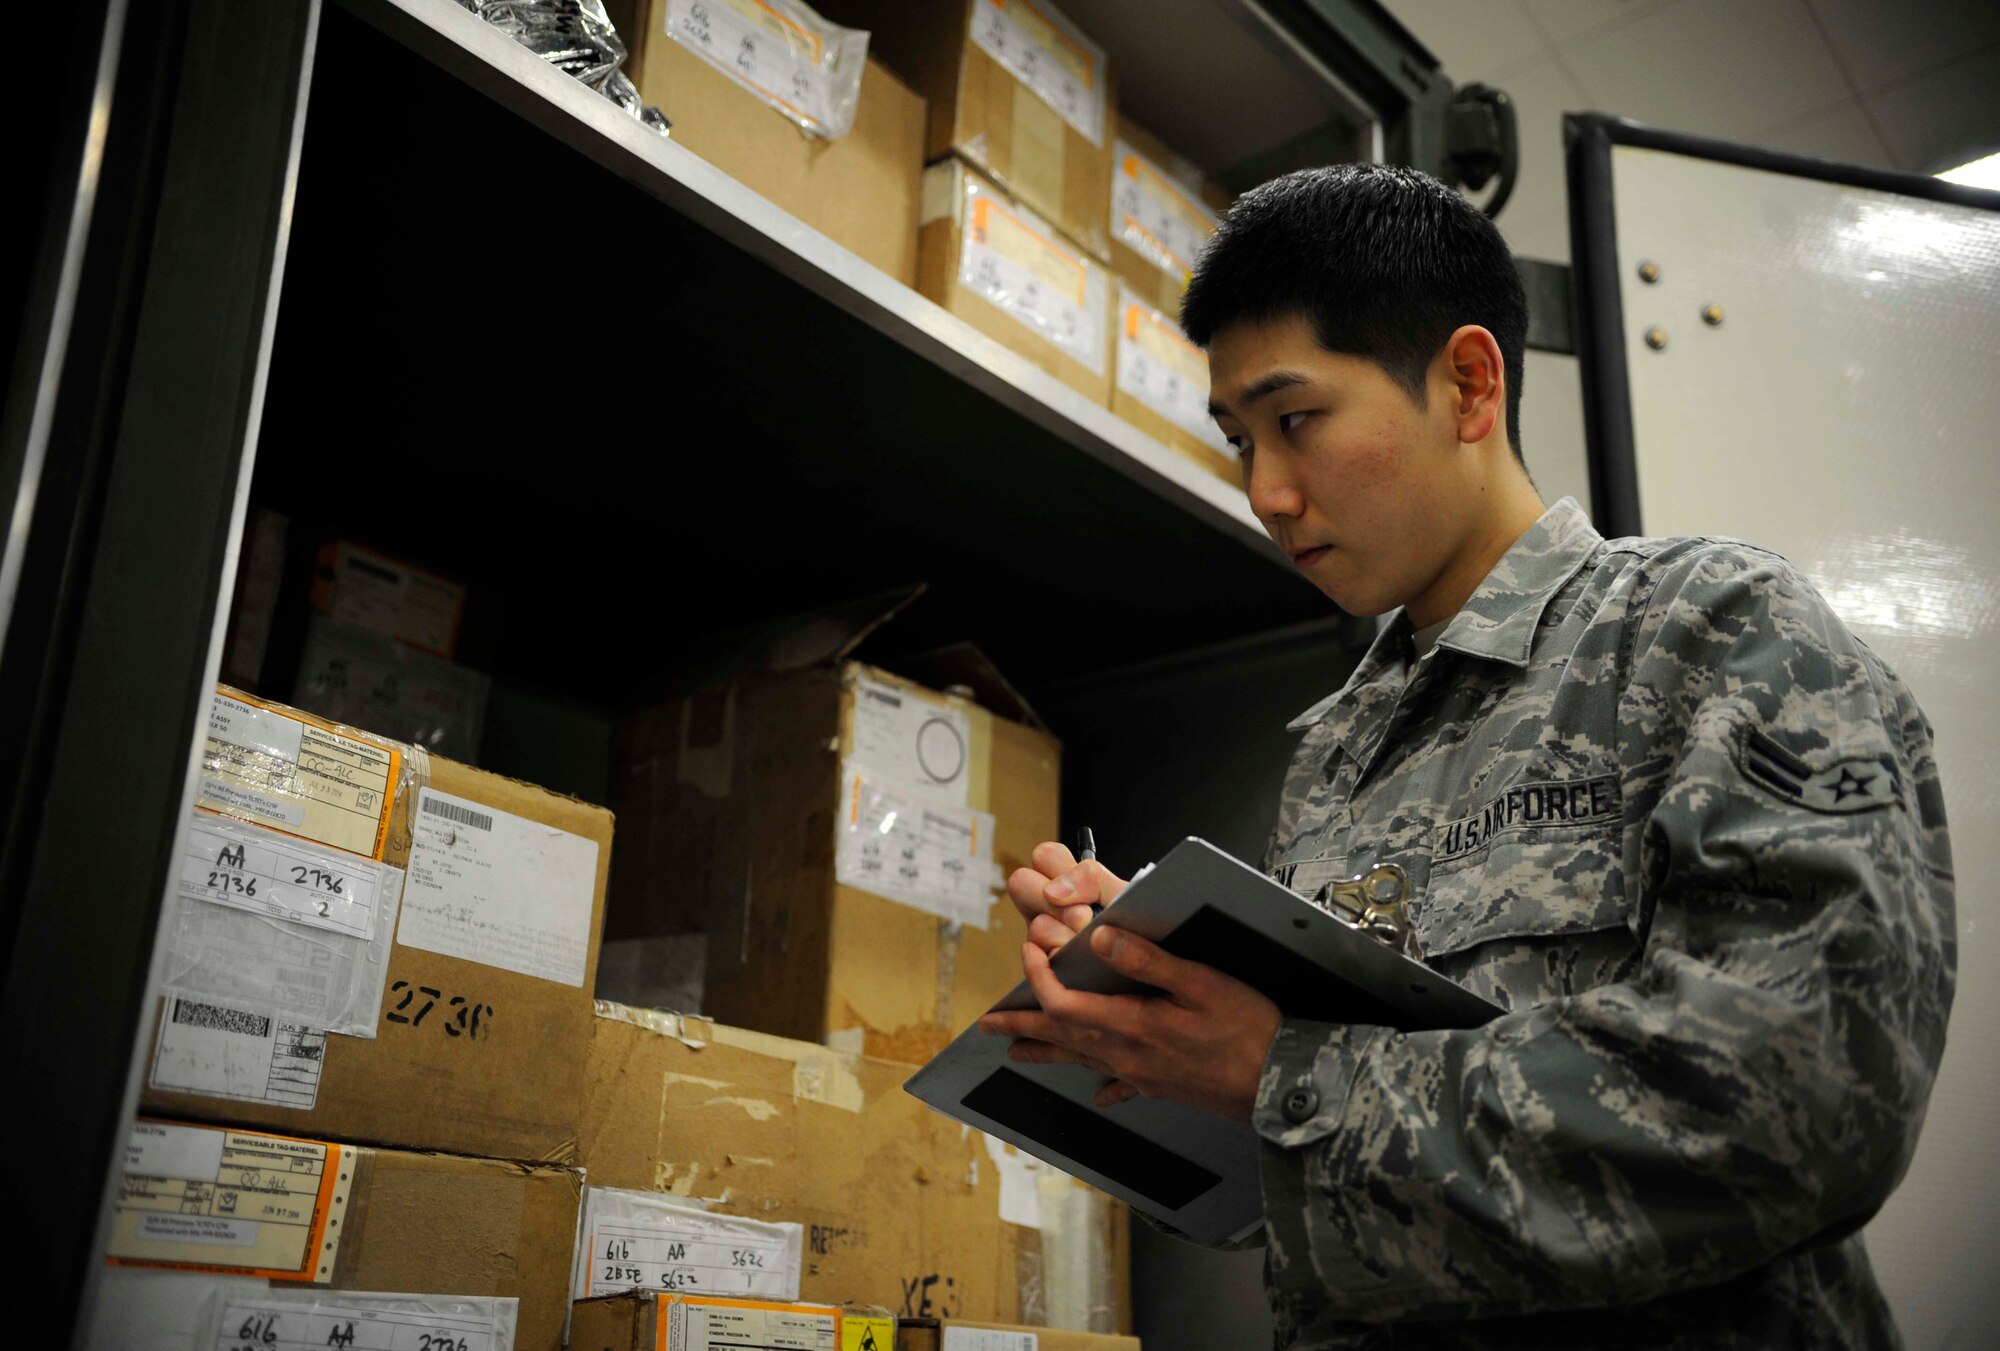 U.S. Air Force Airman 1st Class Christian Pak, materiel management journeyman, checks a serial number on equipment in the aircraft parts store at Misawa Air Base, Japan, Feb. 24, 2015. Pak does this regularly to ensure proper monetary accounting and inventory stock control. (U.S. Air Force photo by Airman 1st Class Jordyn Rucker/Released)